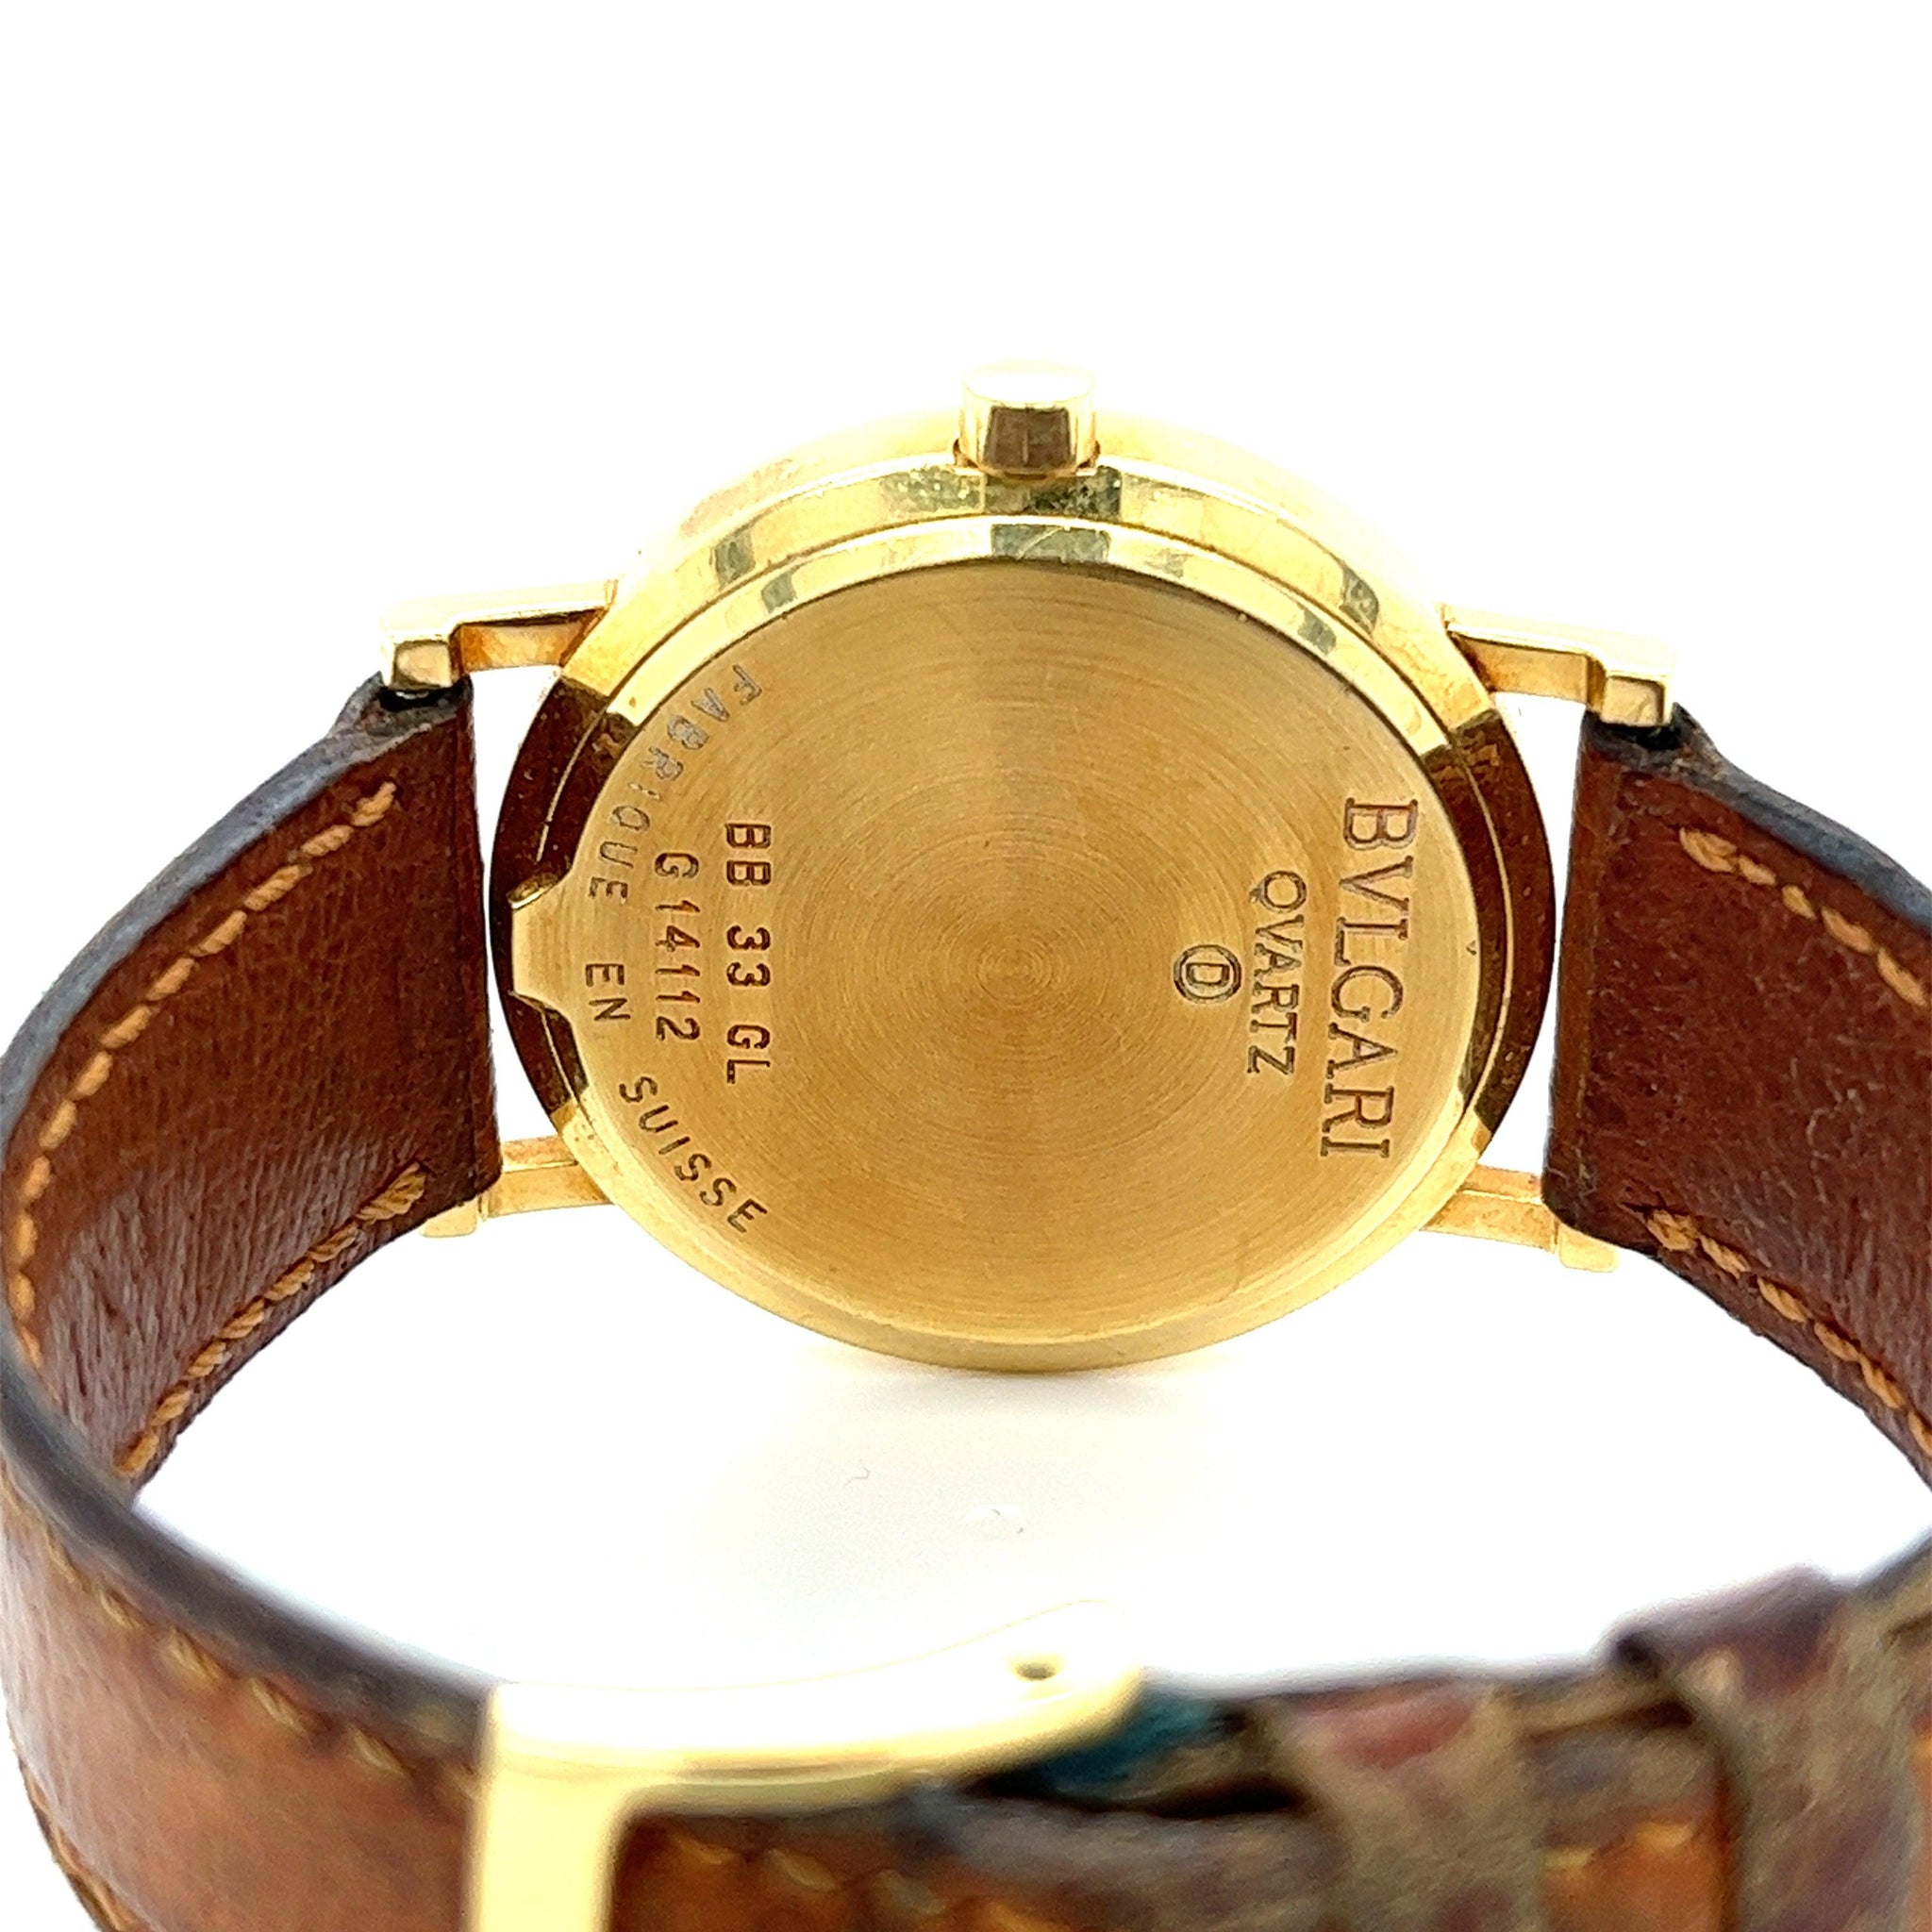 Bvlgari Vintage Mens Watch Ref. BB30 GI in 18K Yellow Gold & Leather Strap